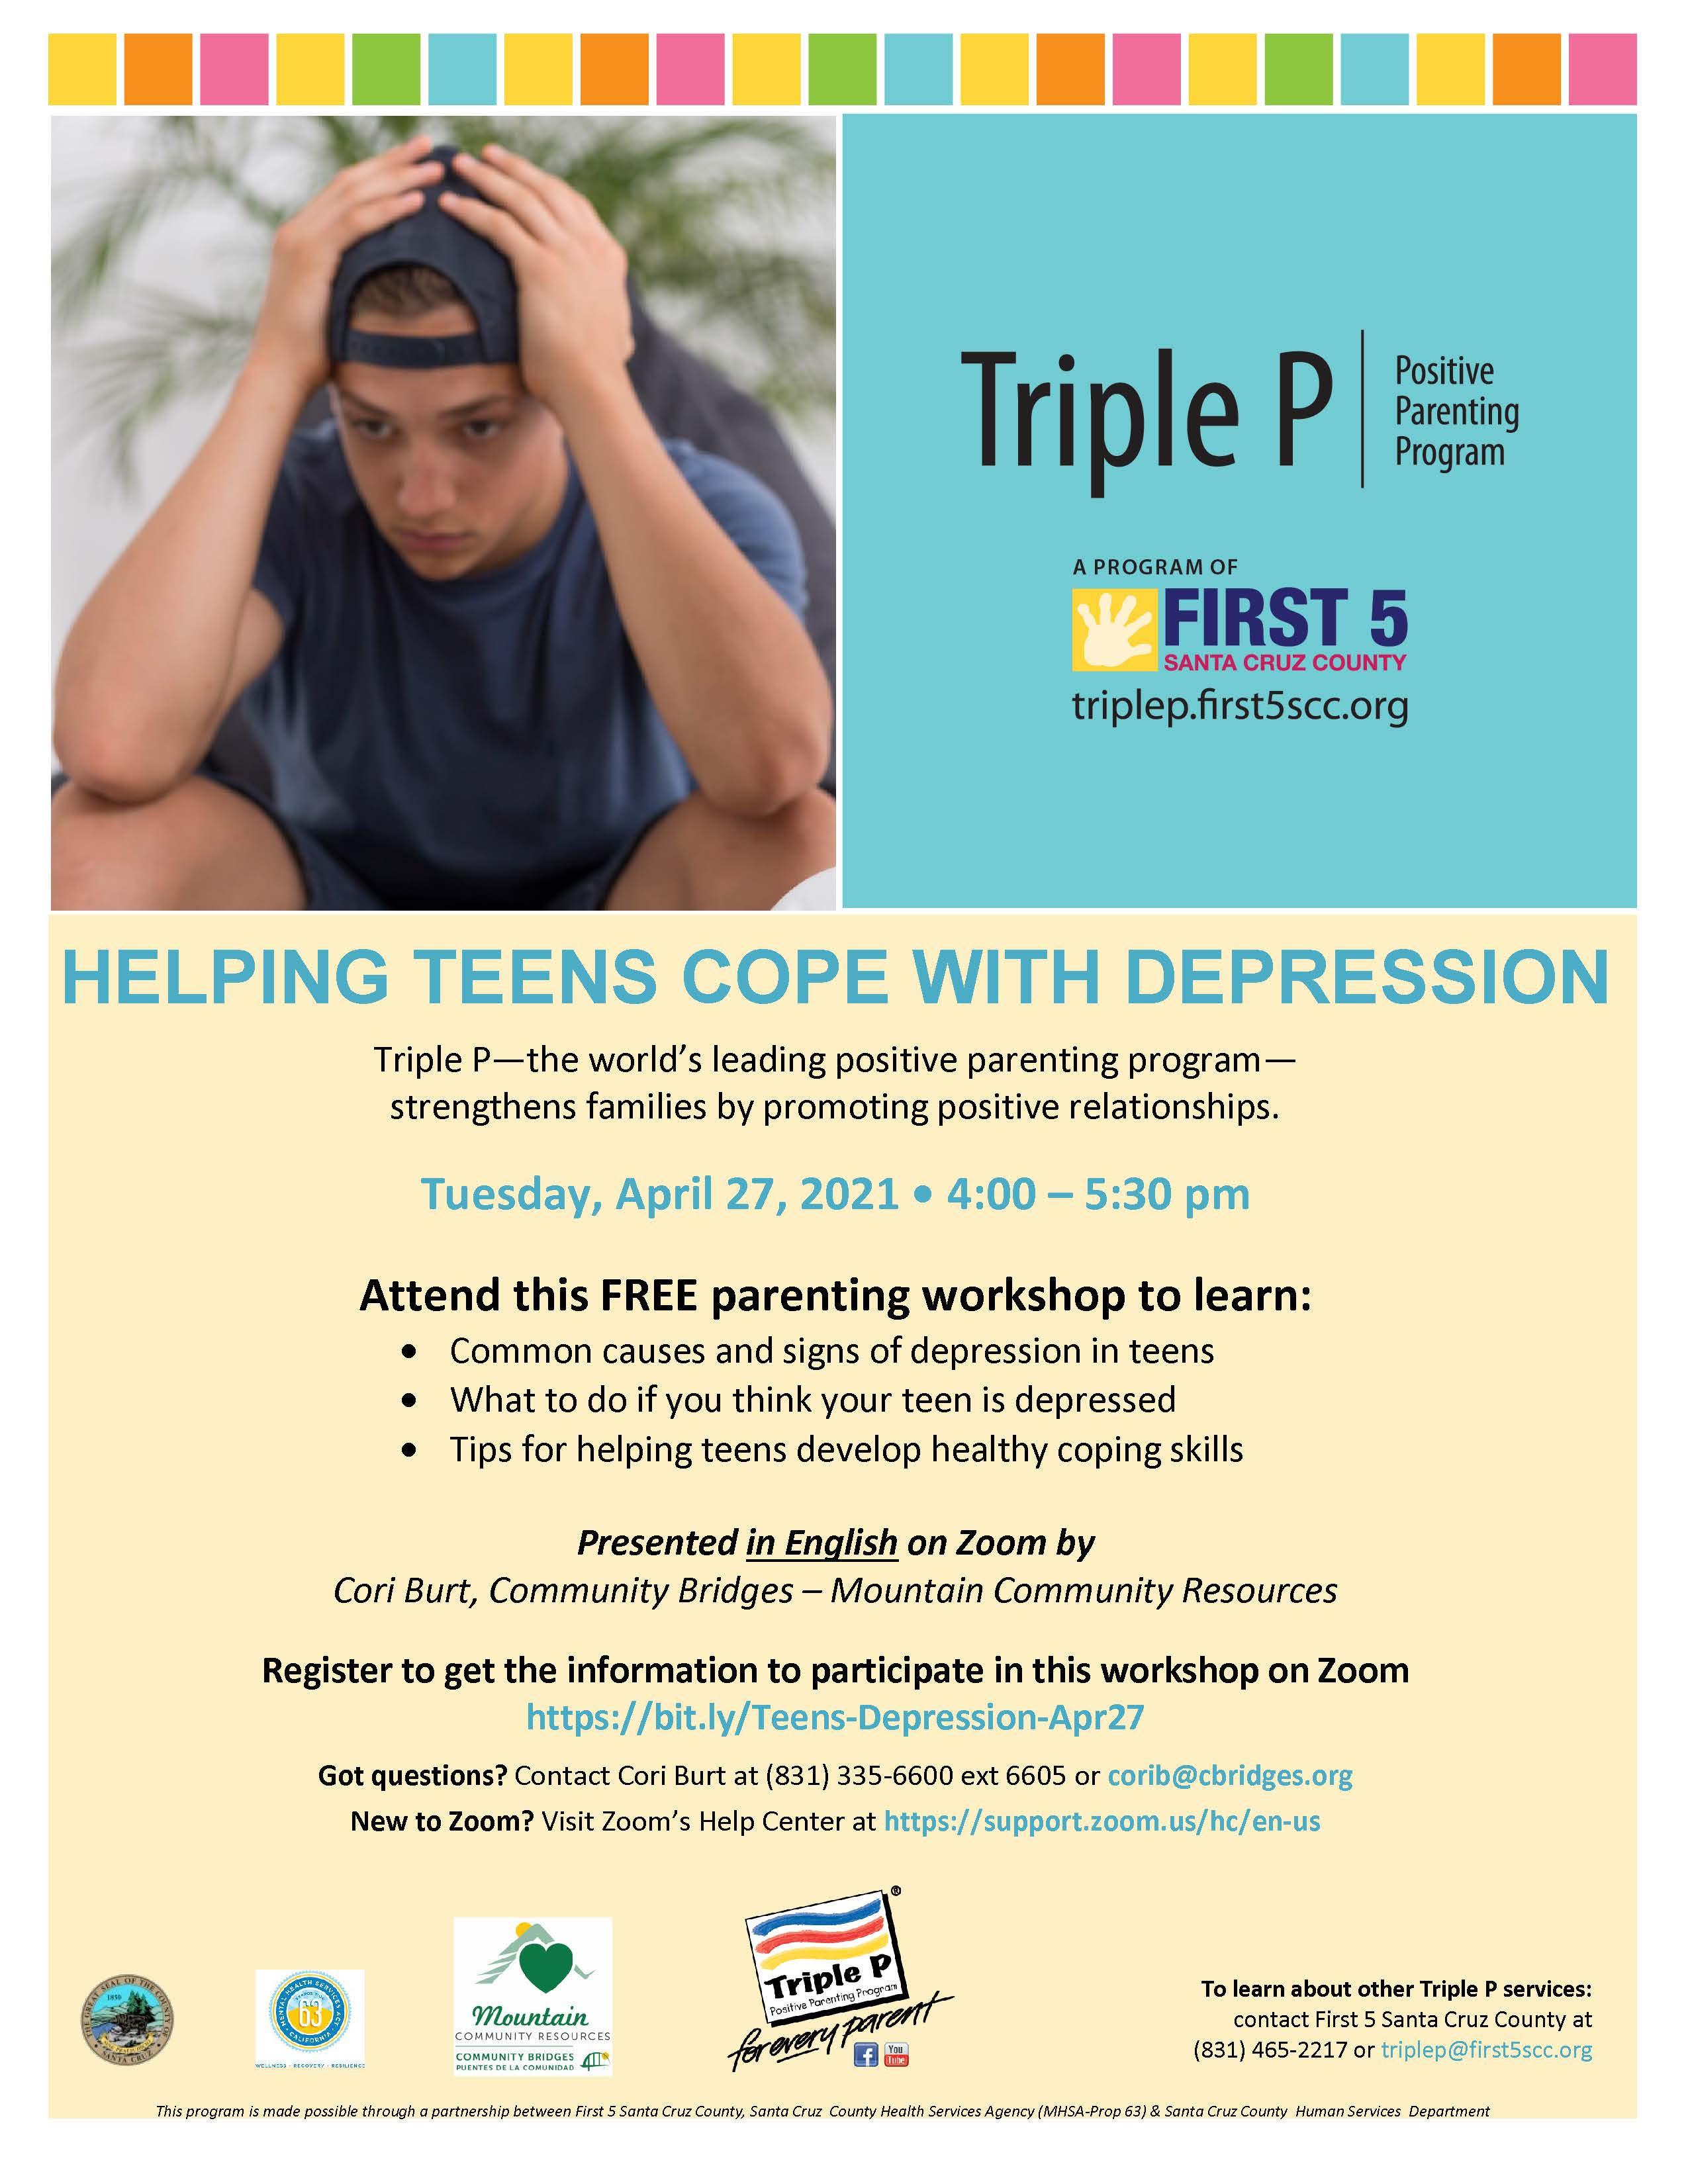 helping teens with depression workshop; call 831-335-6600 for details